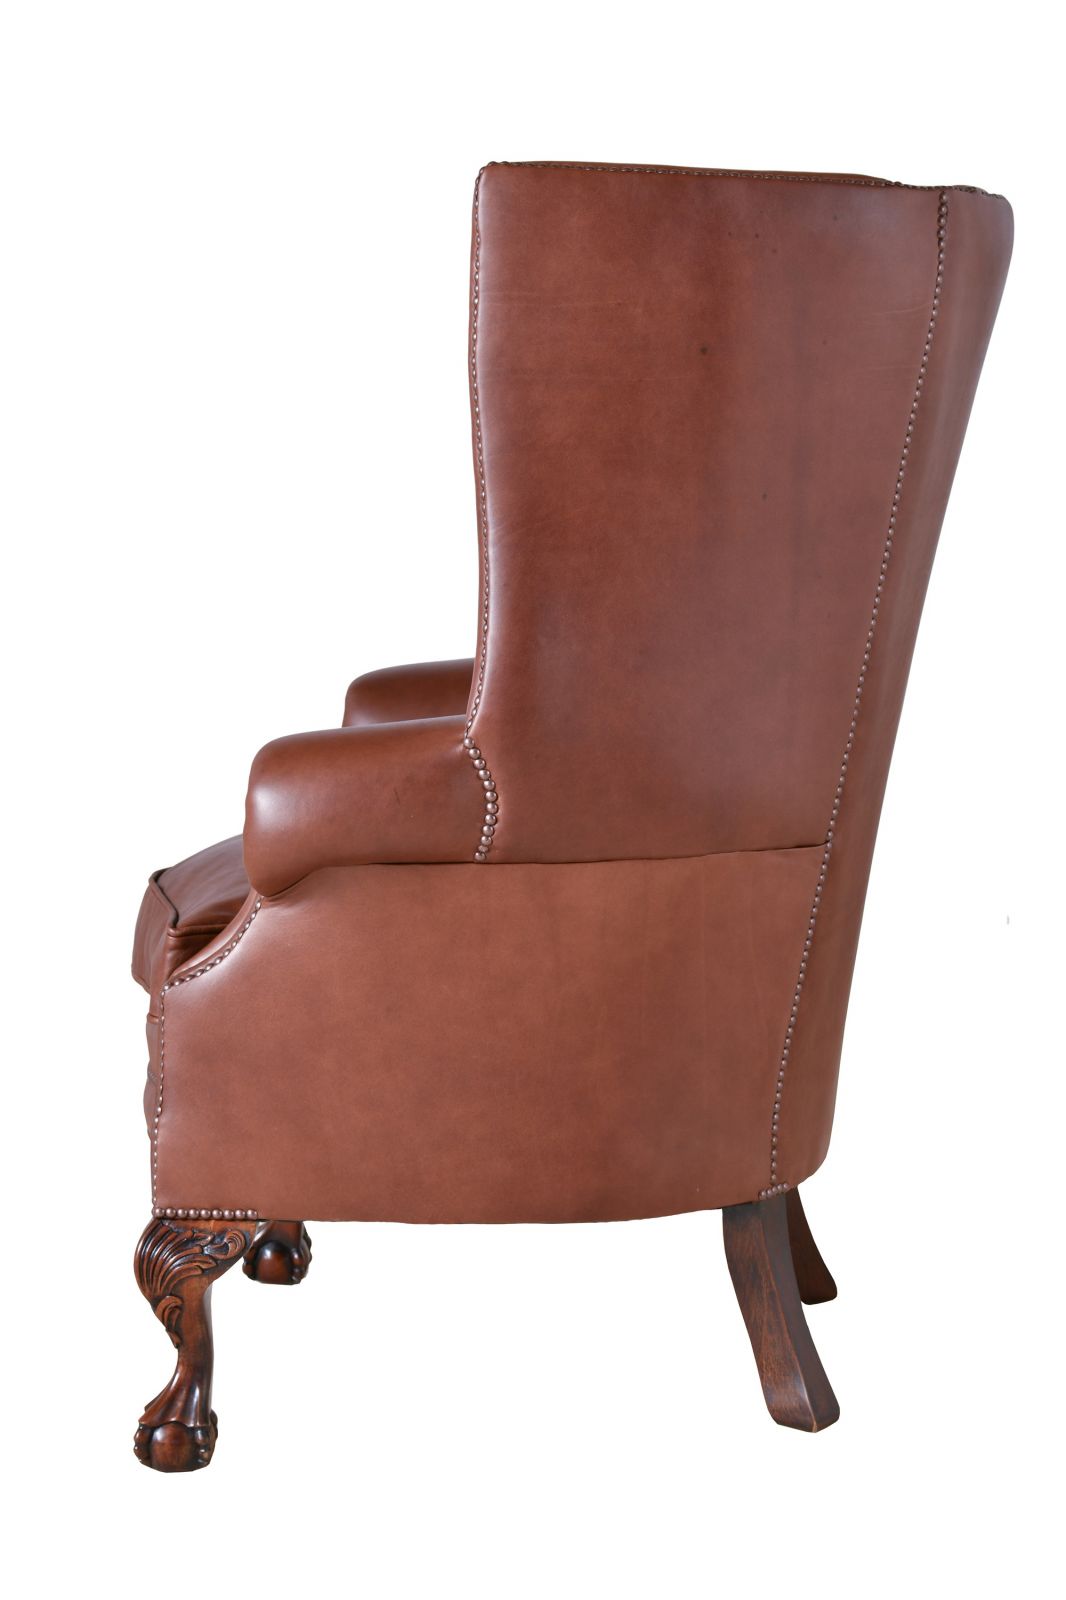 leather and nailed antique wingchair inspired by